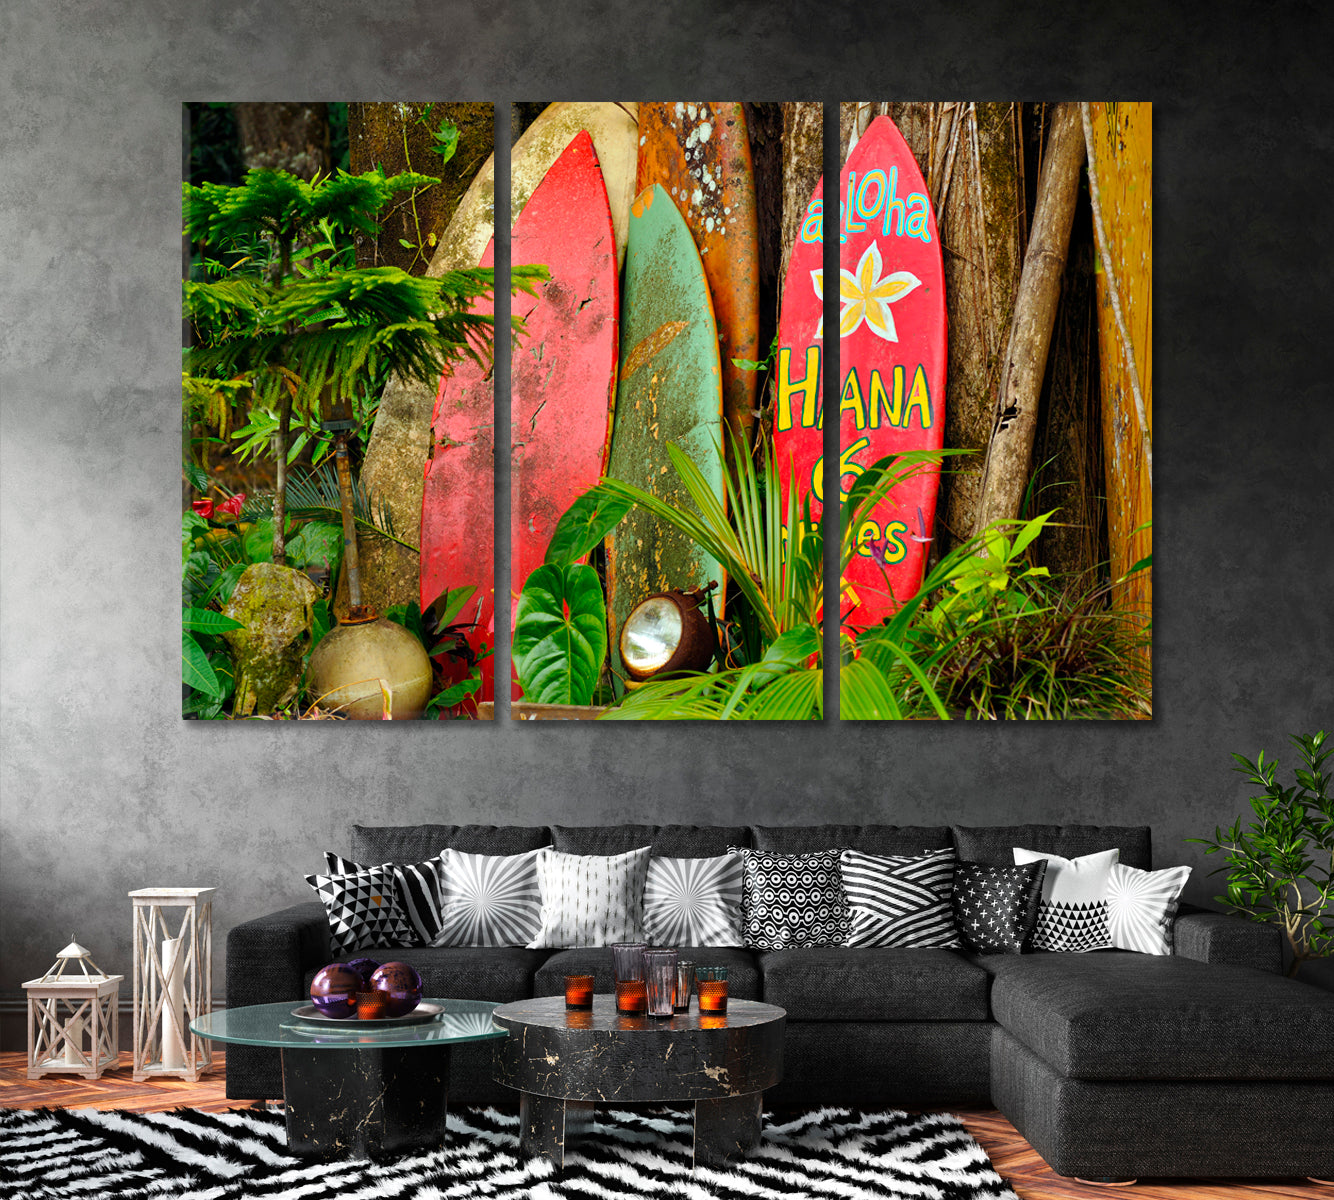 Old Surfboards On Hawaii Canvas Print ArtLexy 3 Panels 36"x24" inches 